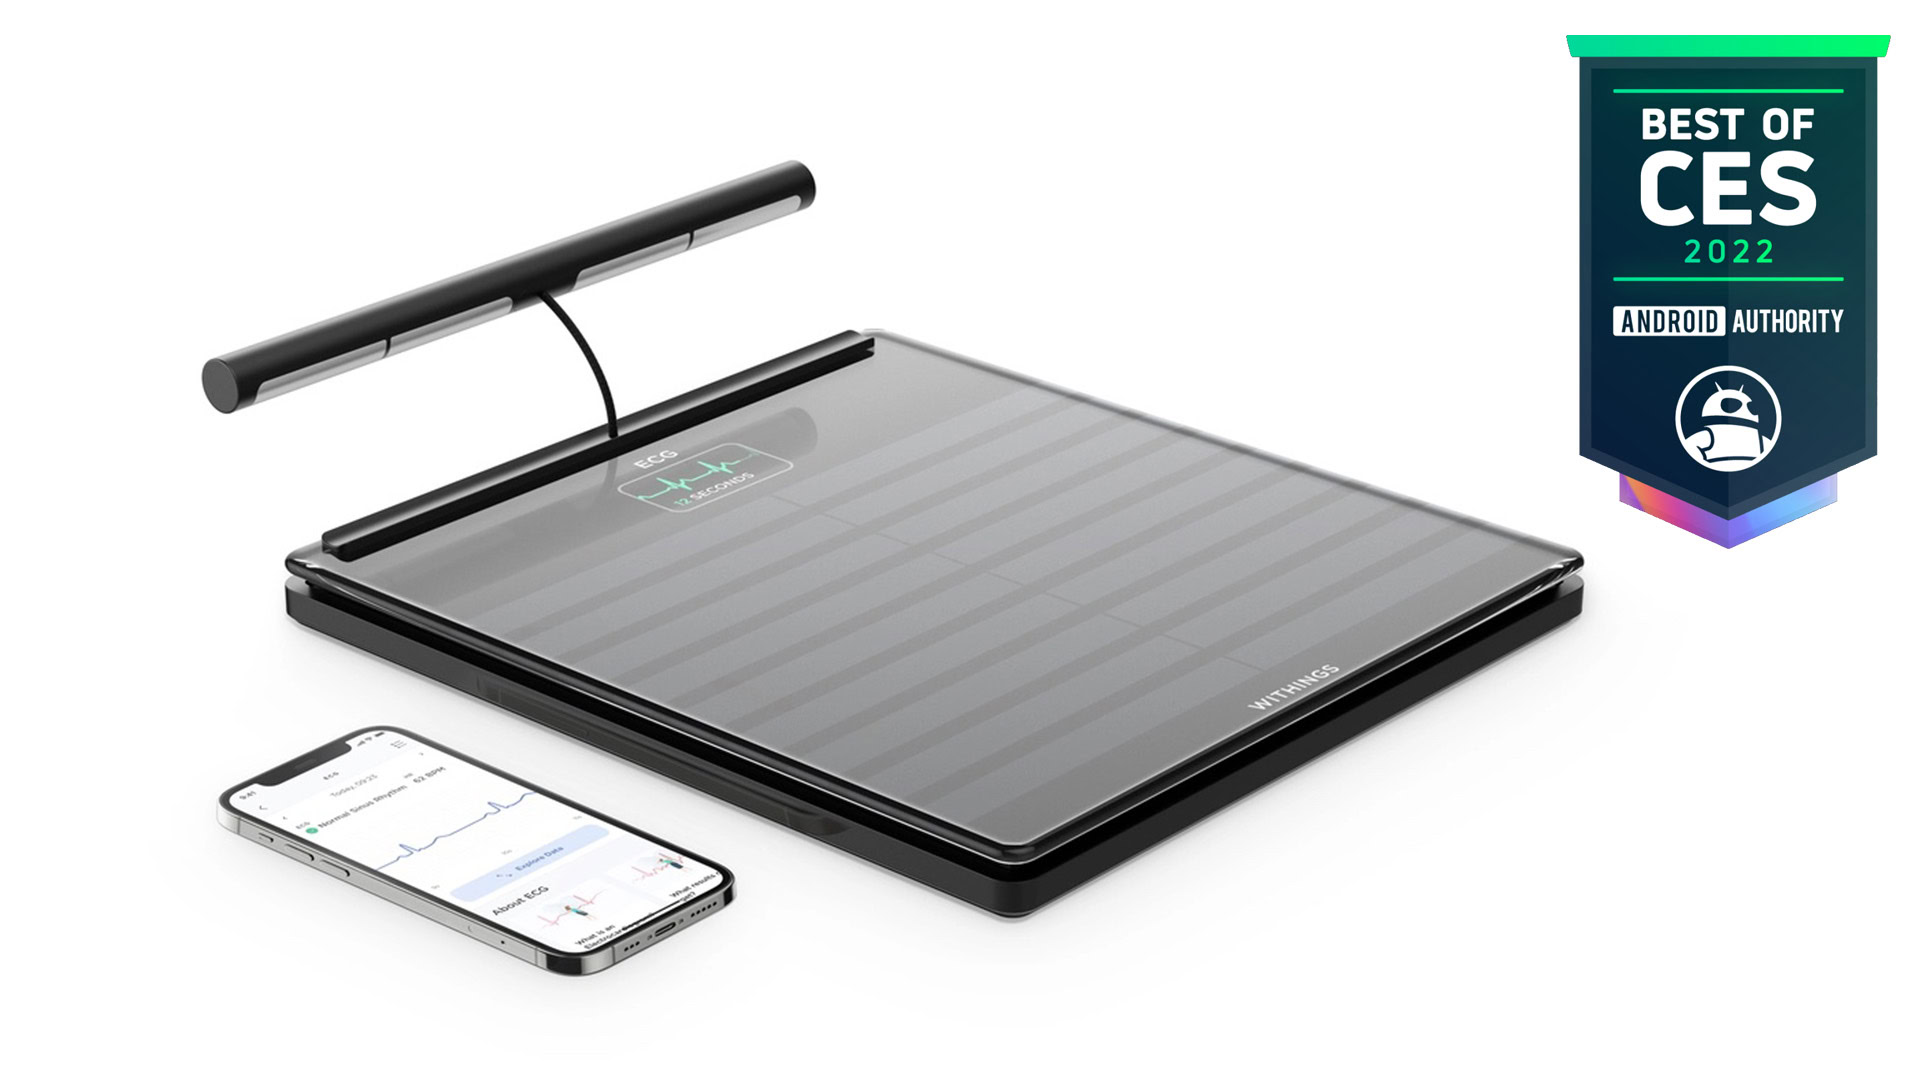 Withings' Body Smart Scale Adds Tact to its List of Features